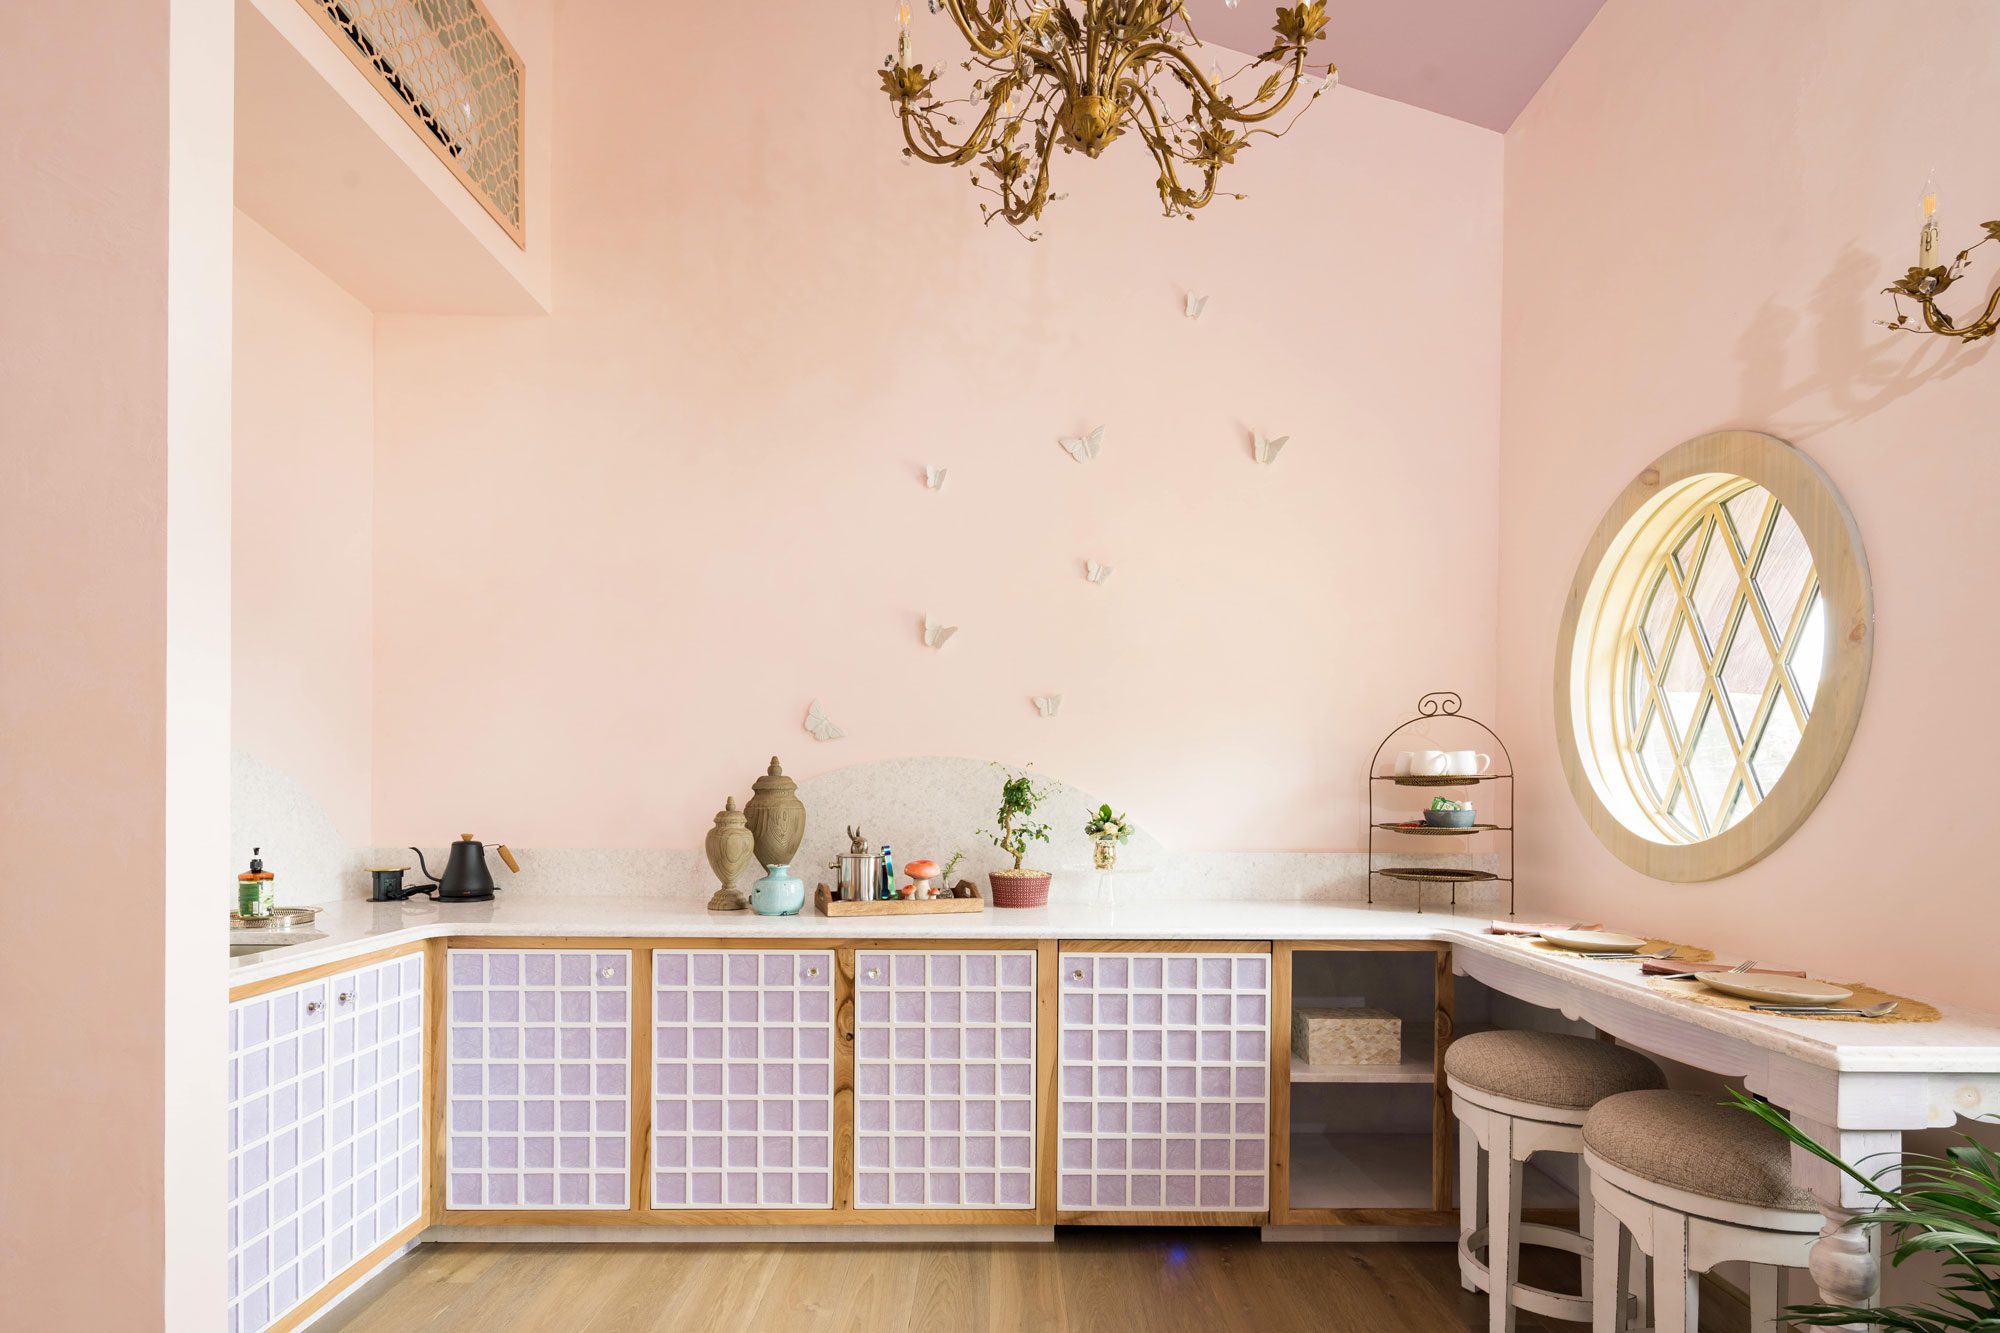 kitchen with shimmers of golds, creams, and purples embellishing the elegant, pink walls